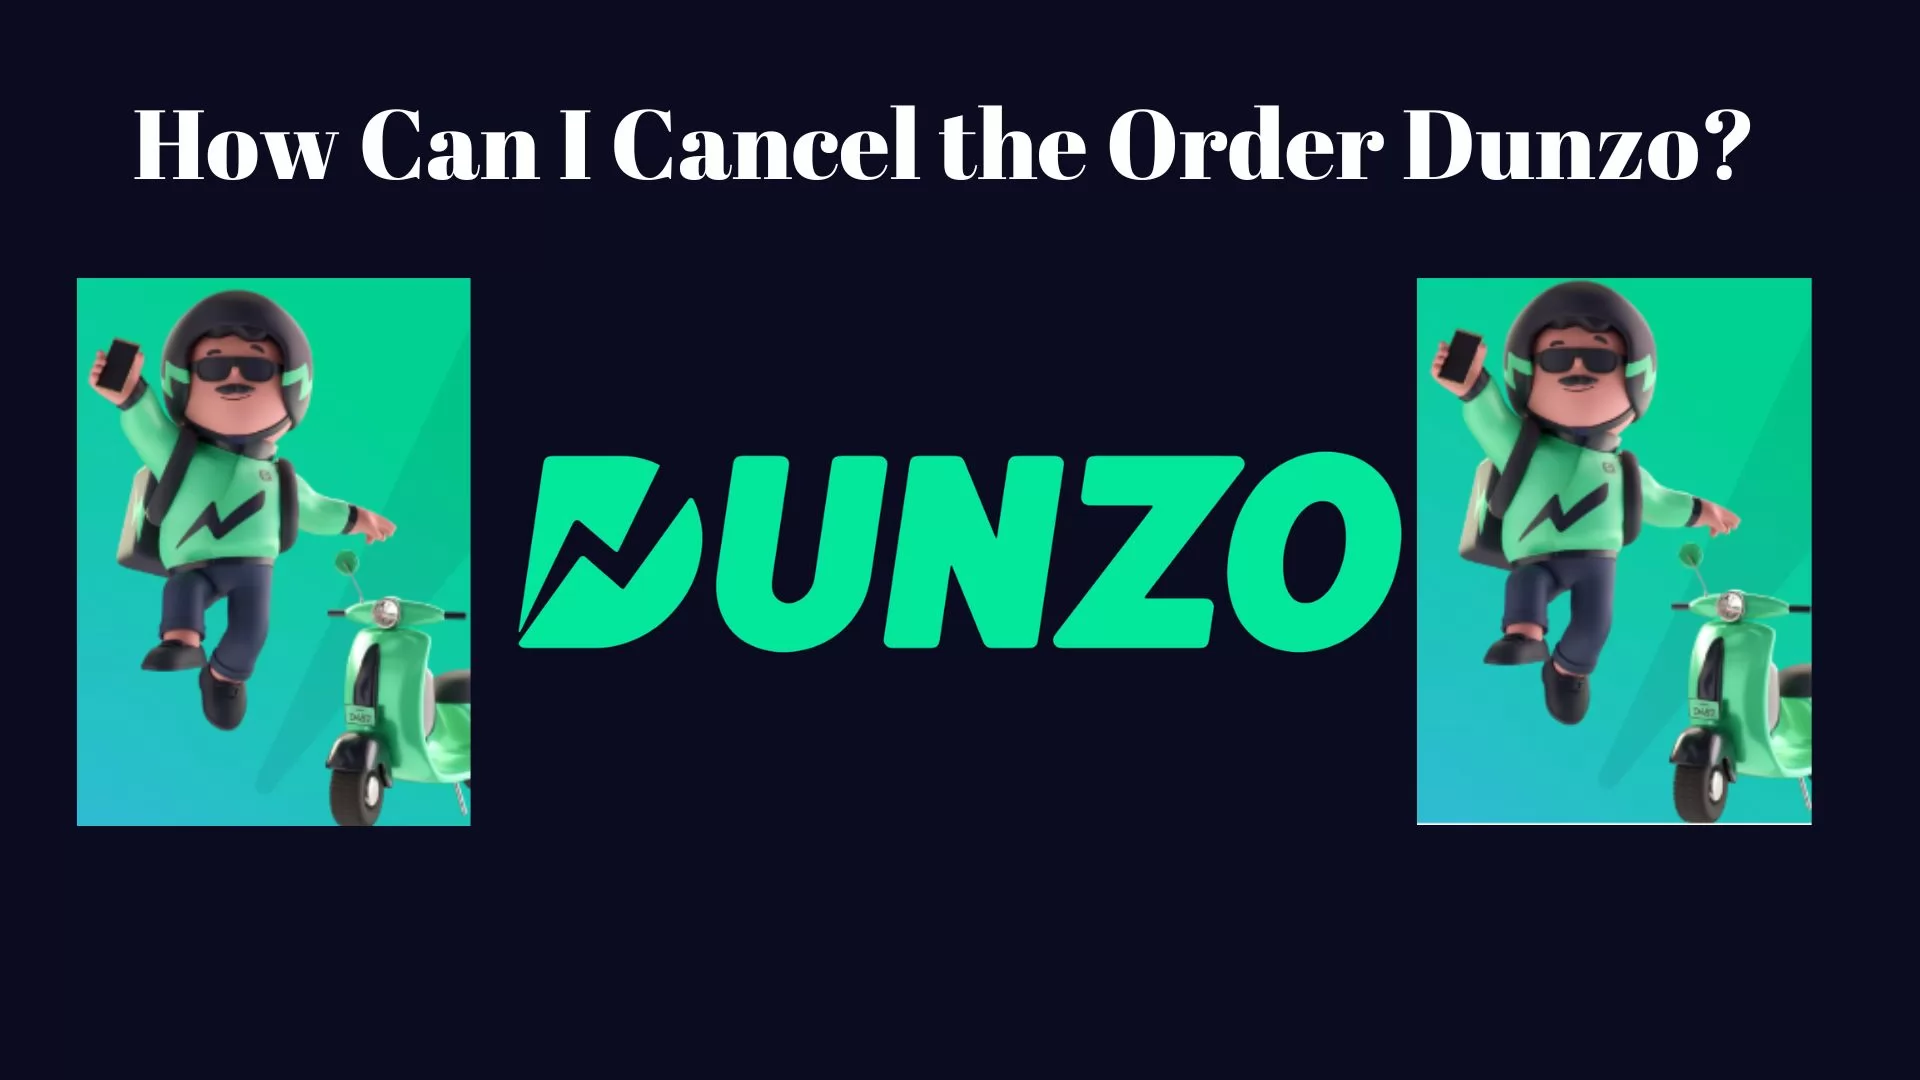 How Can I Cancel the Order Dunzo